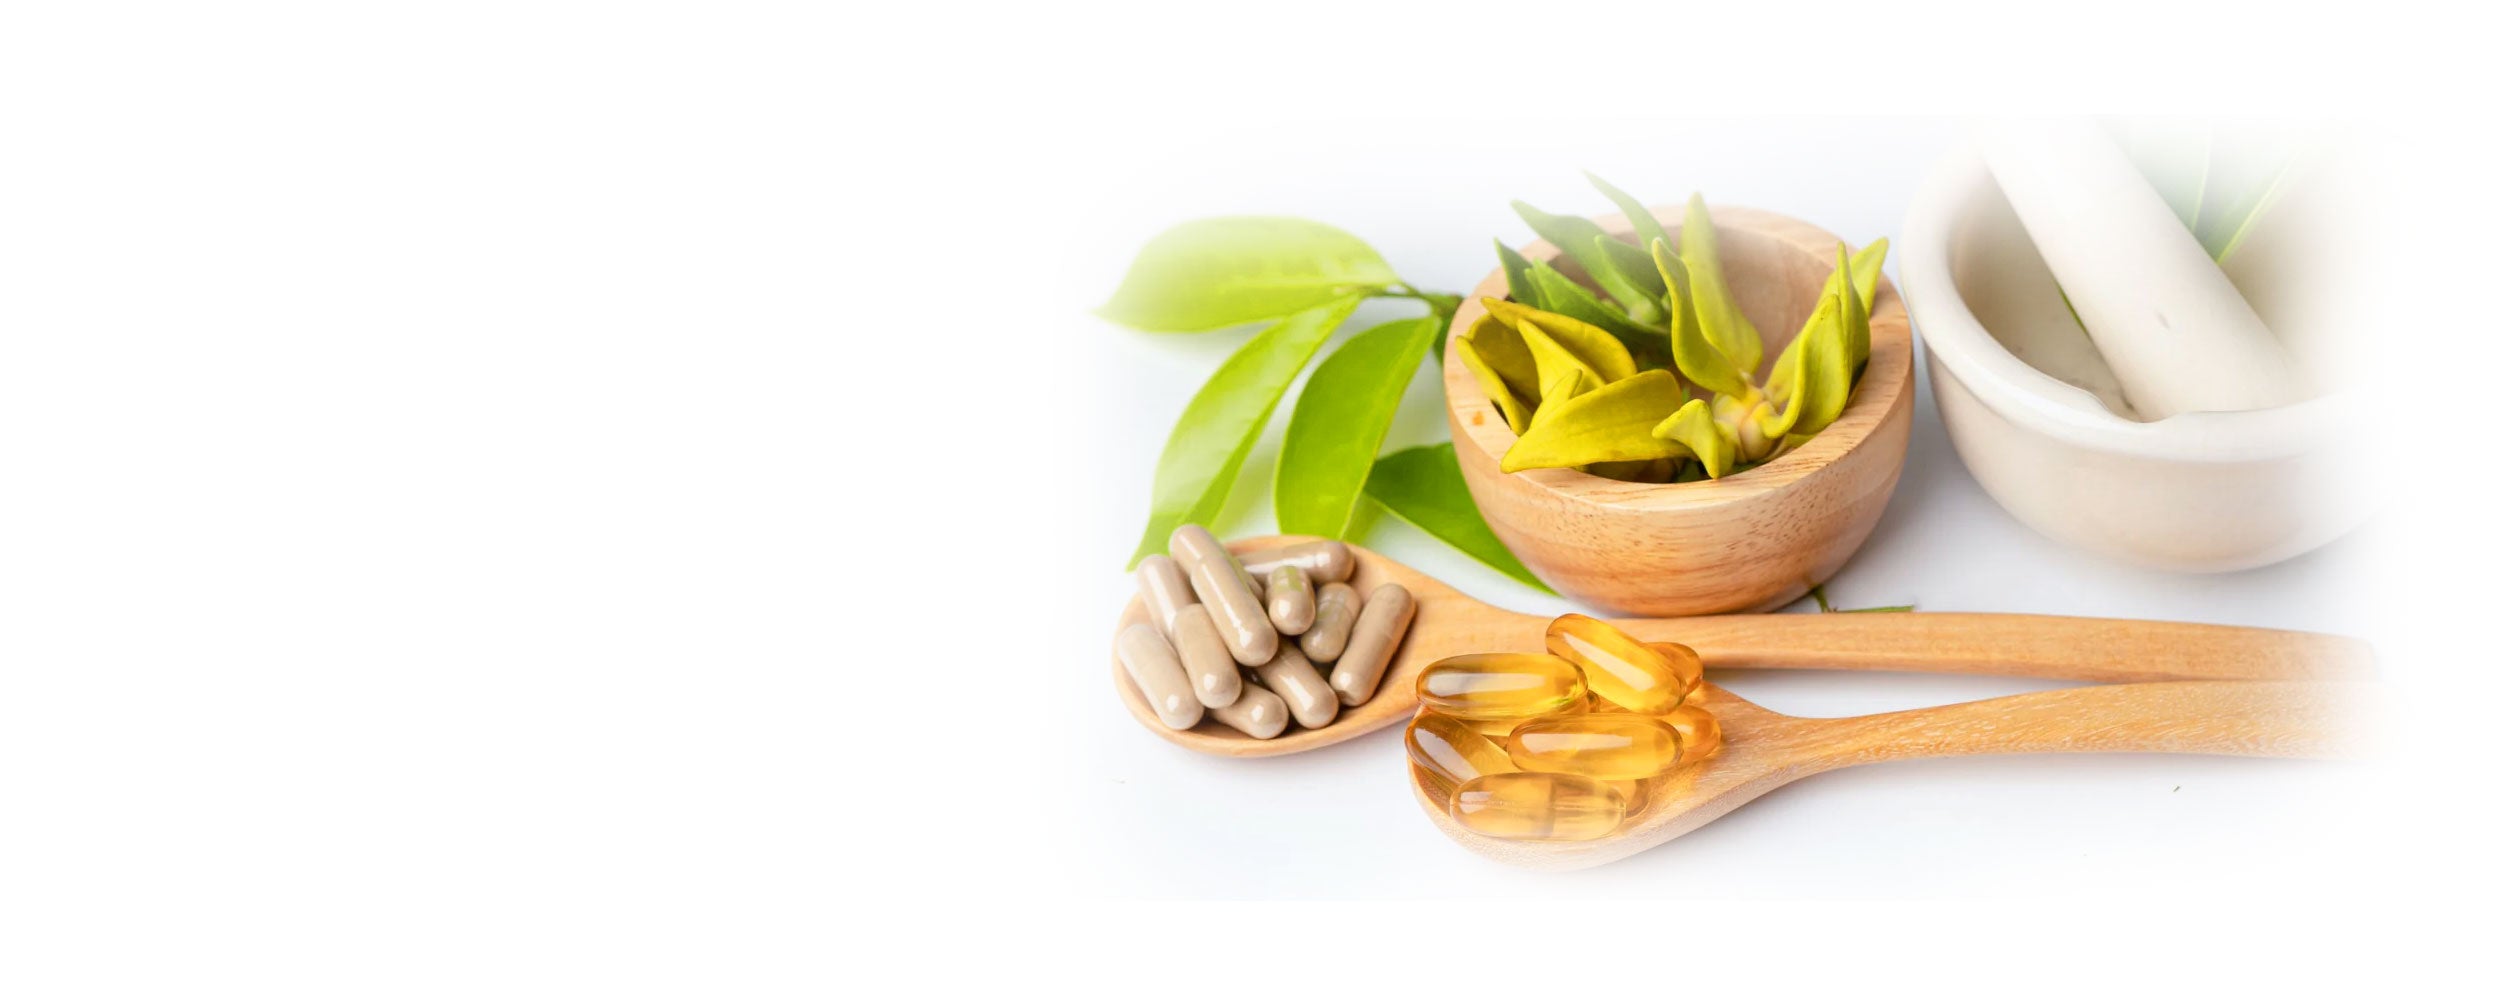 Herbal capsules and Omega-3 oils with green leaves, Lily & Loaf's promise for holistic health and vitality.